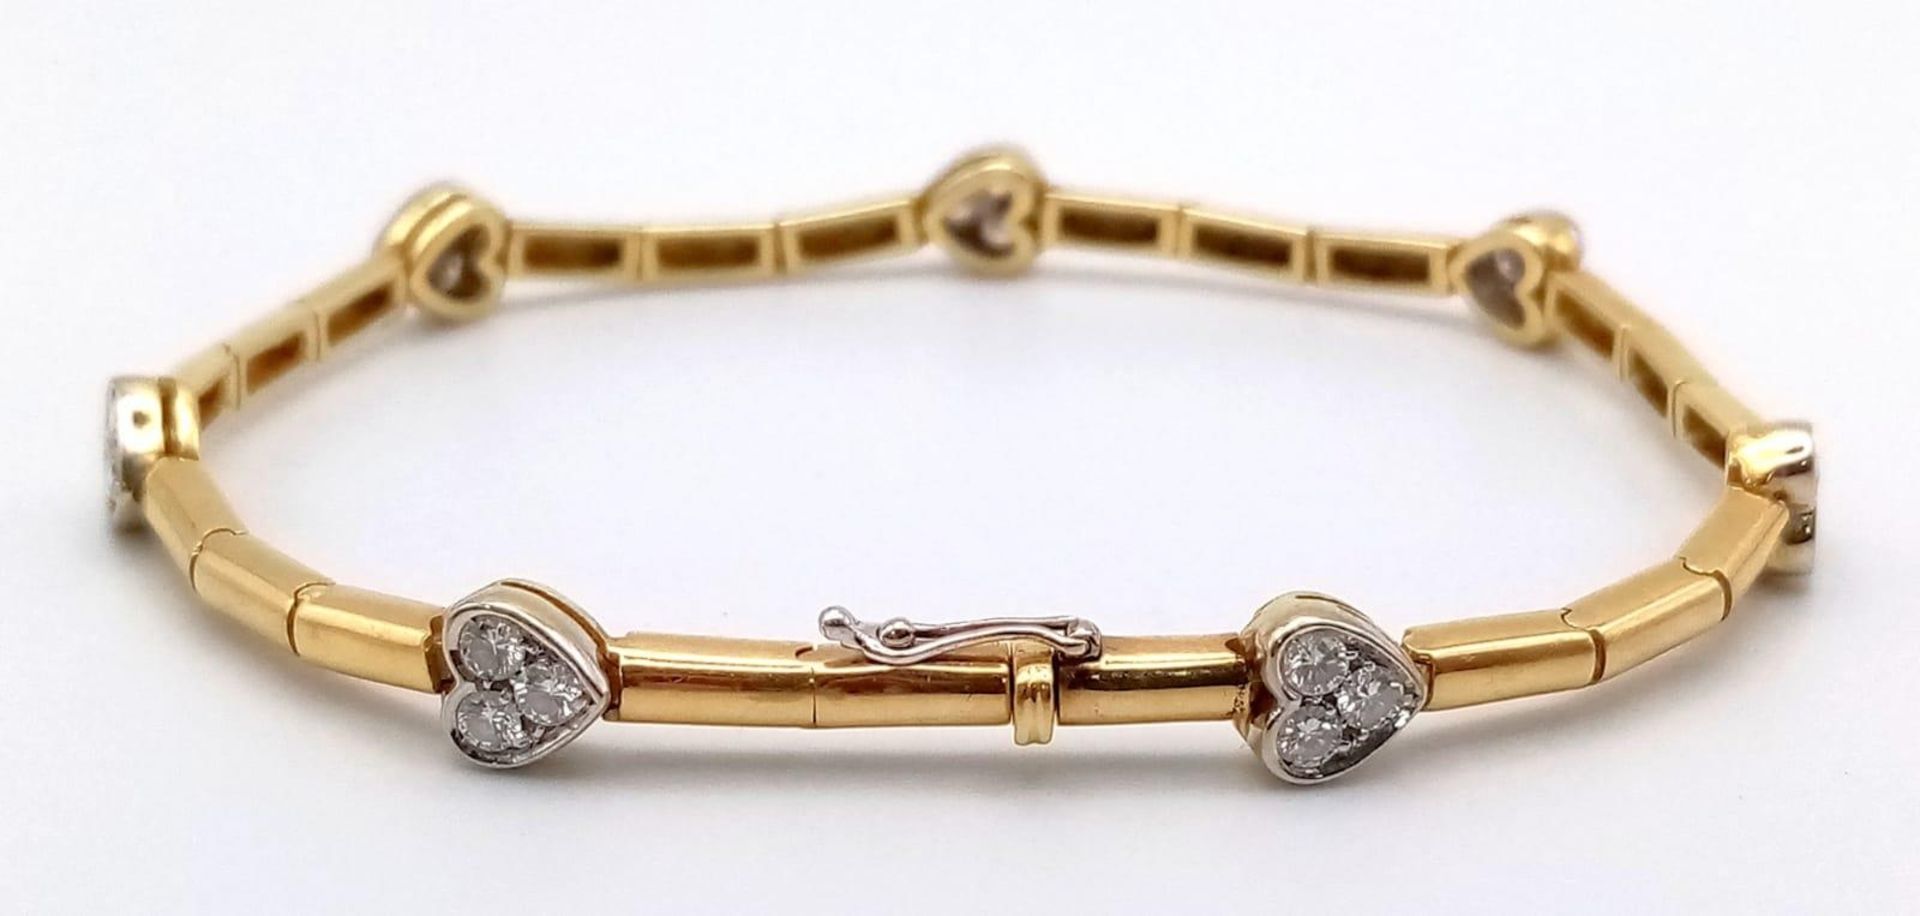 A Gorgeous 18K Gold and Heart-Diamond Necklace and Bracelet Set. The necklace is decorated with - Image 6 of 21